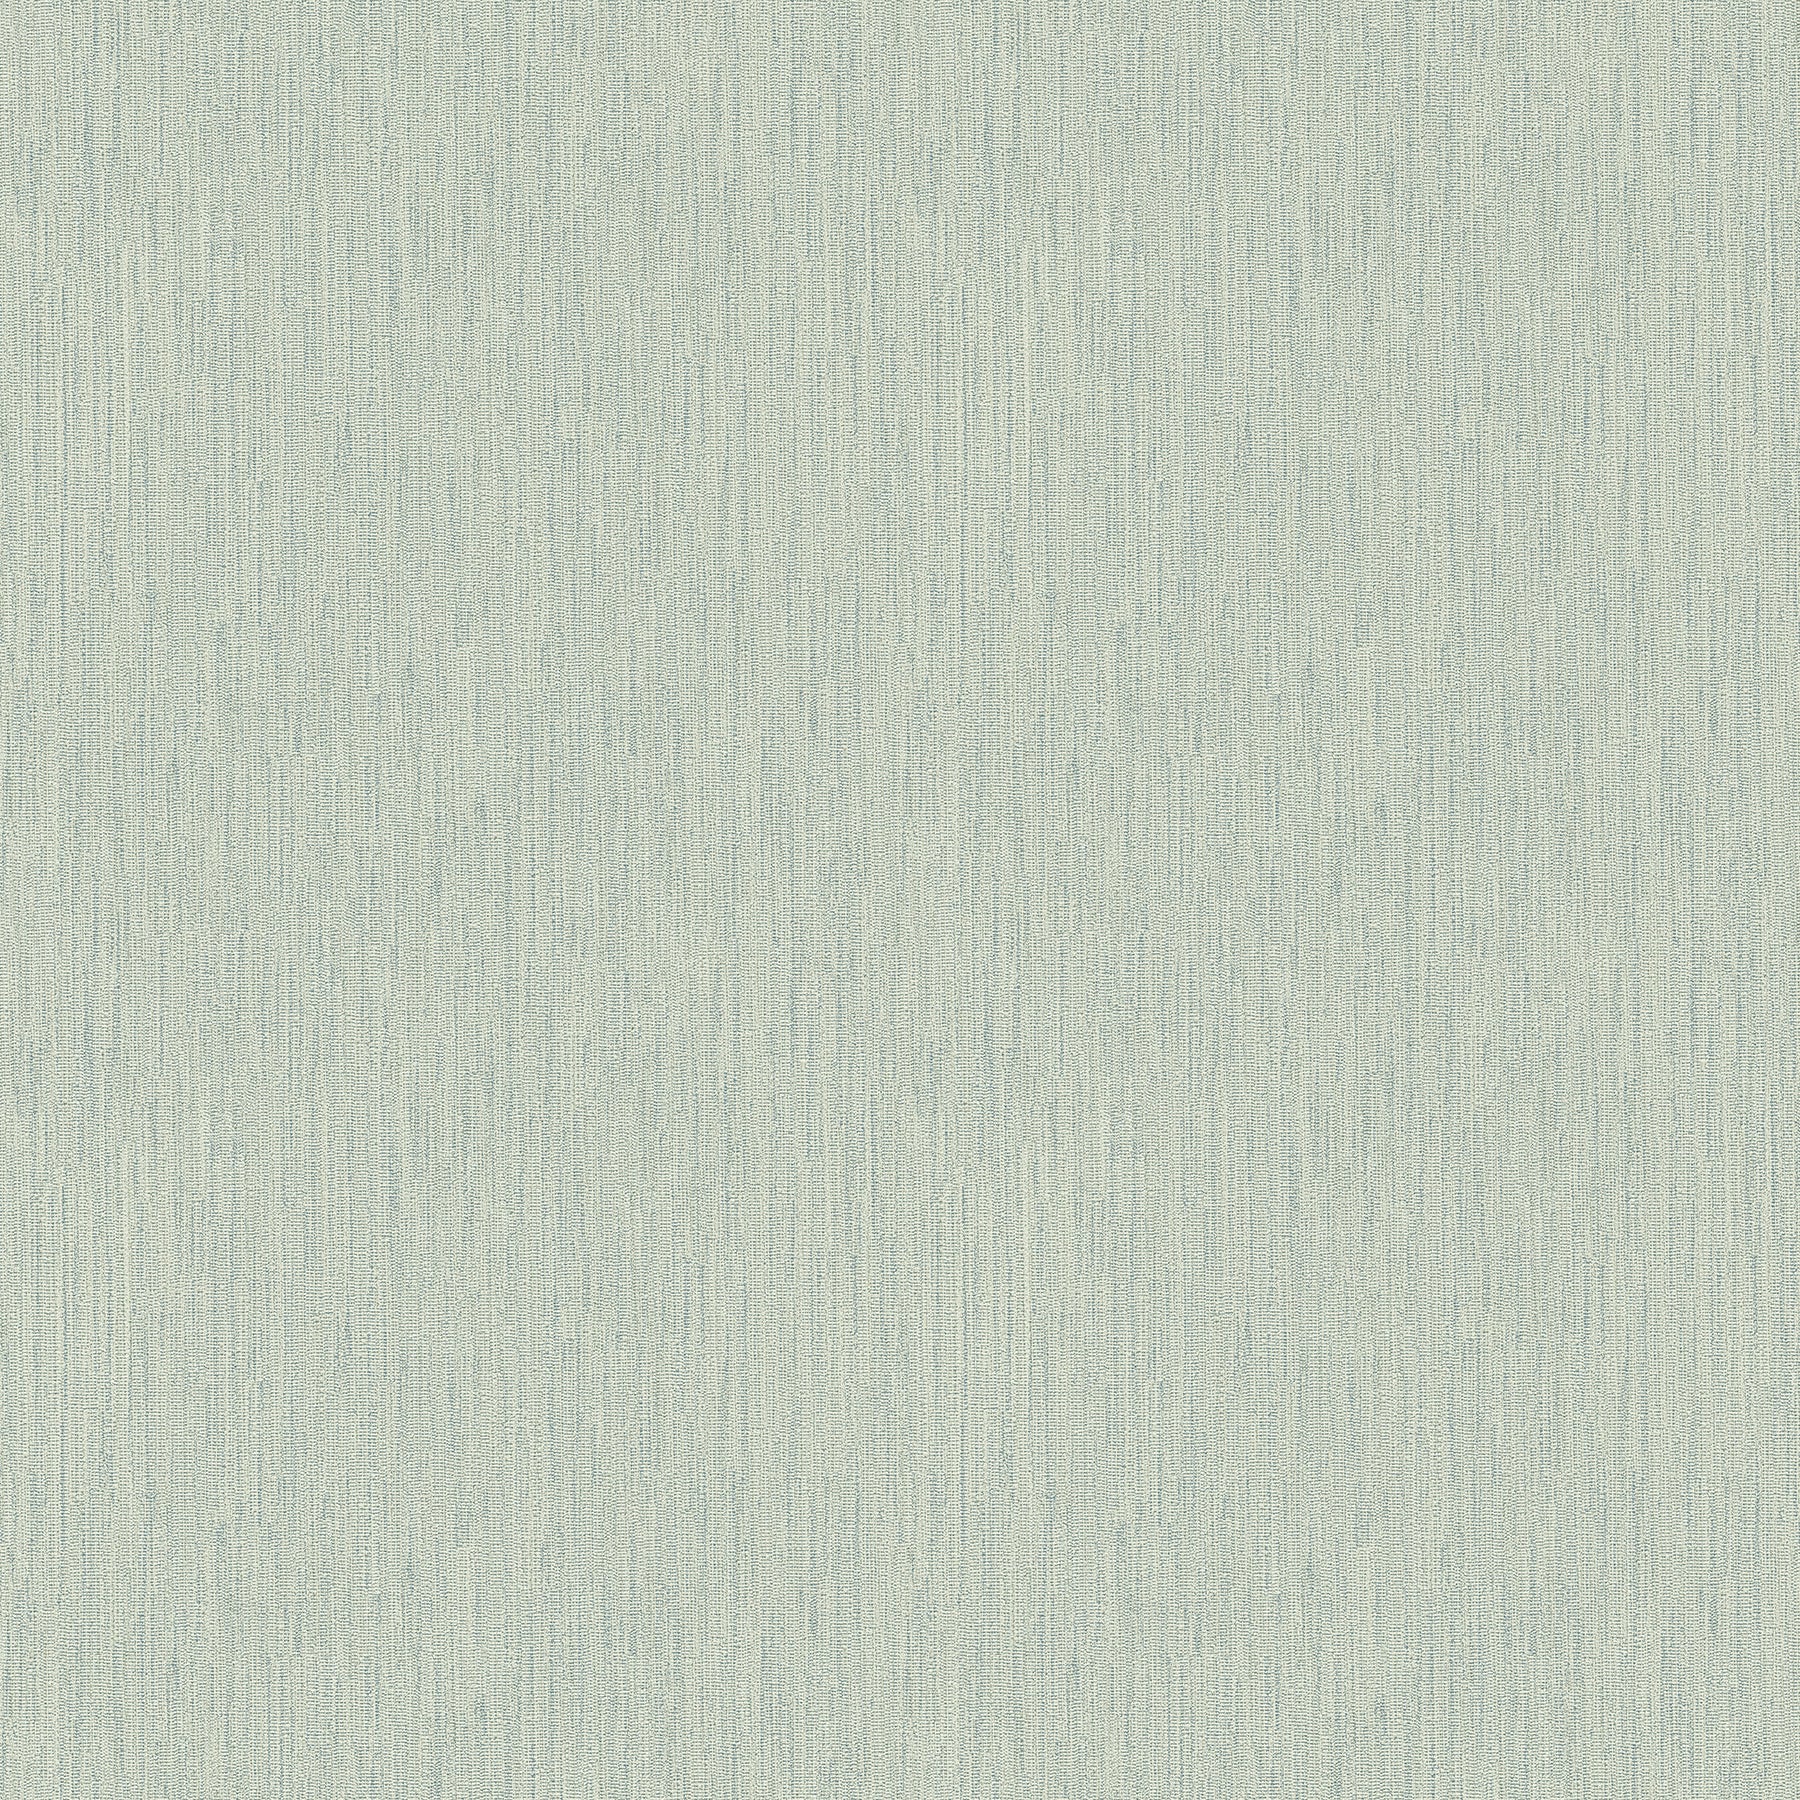 Looking for 2971-86337 Dimensions Terence Light Green Pinstripe Texture Light Green A-Street Prints Wallpaper